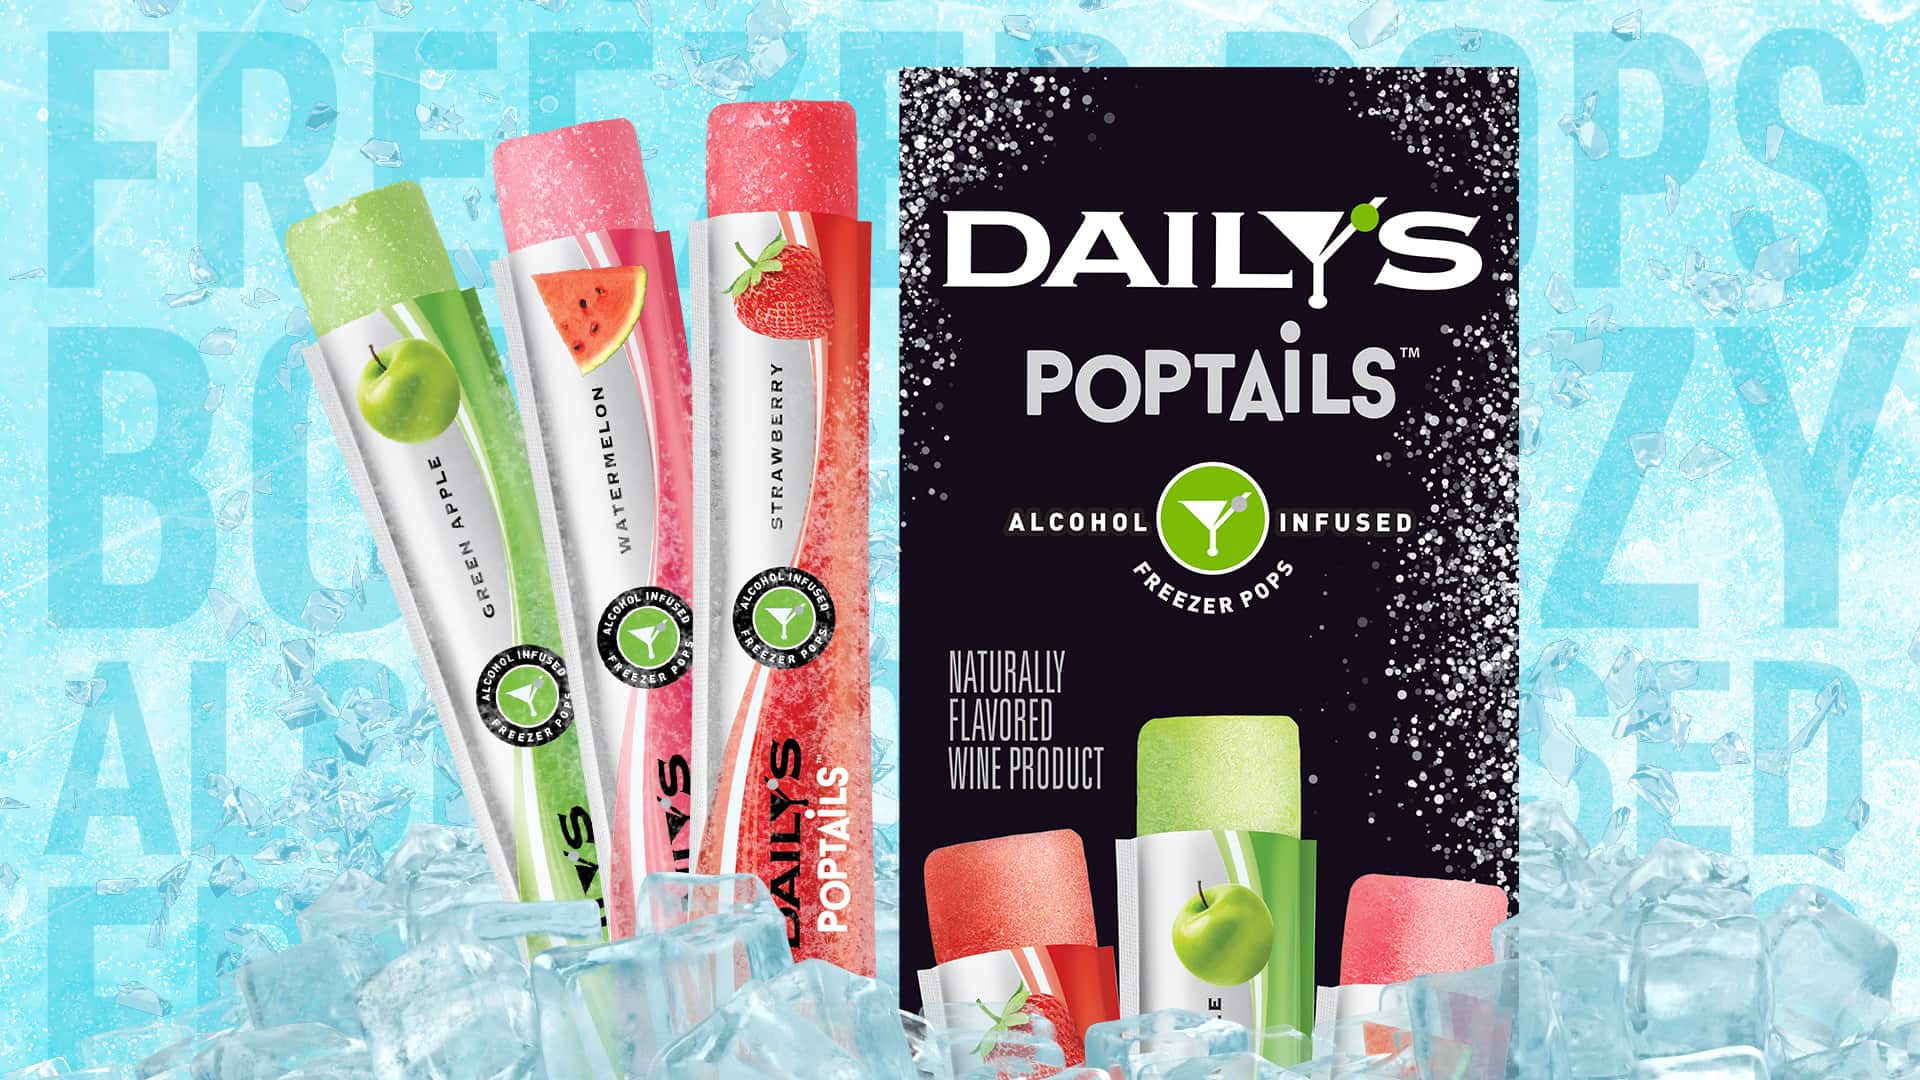 daily's poptails box and tubes sitting in a pile of ice